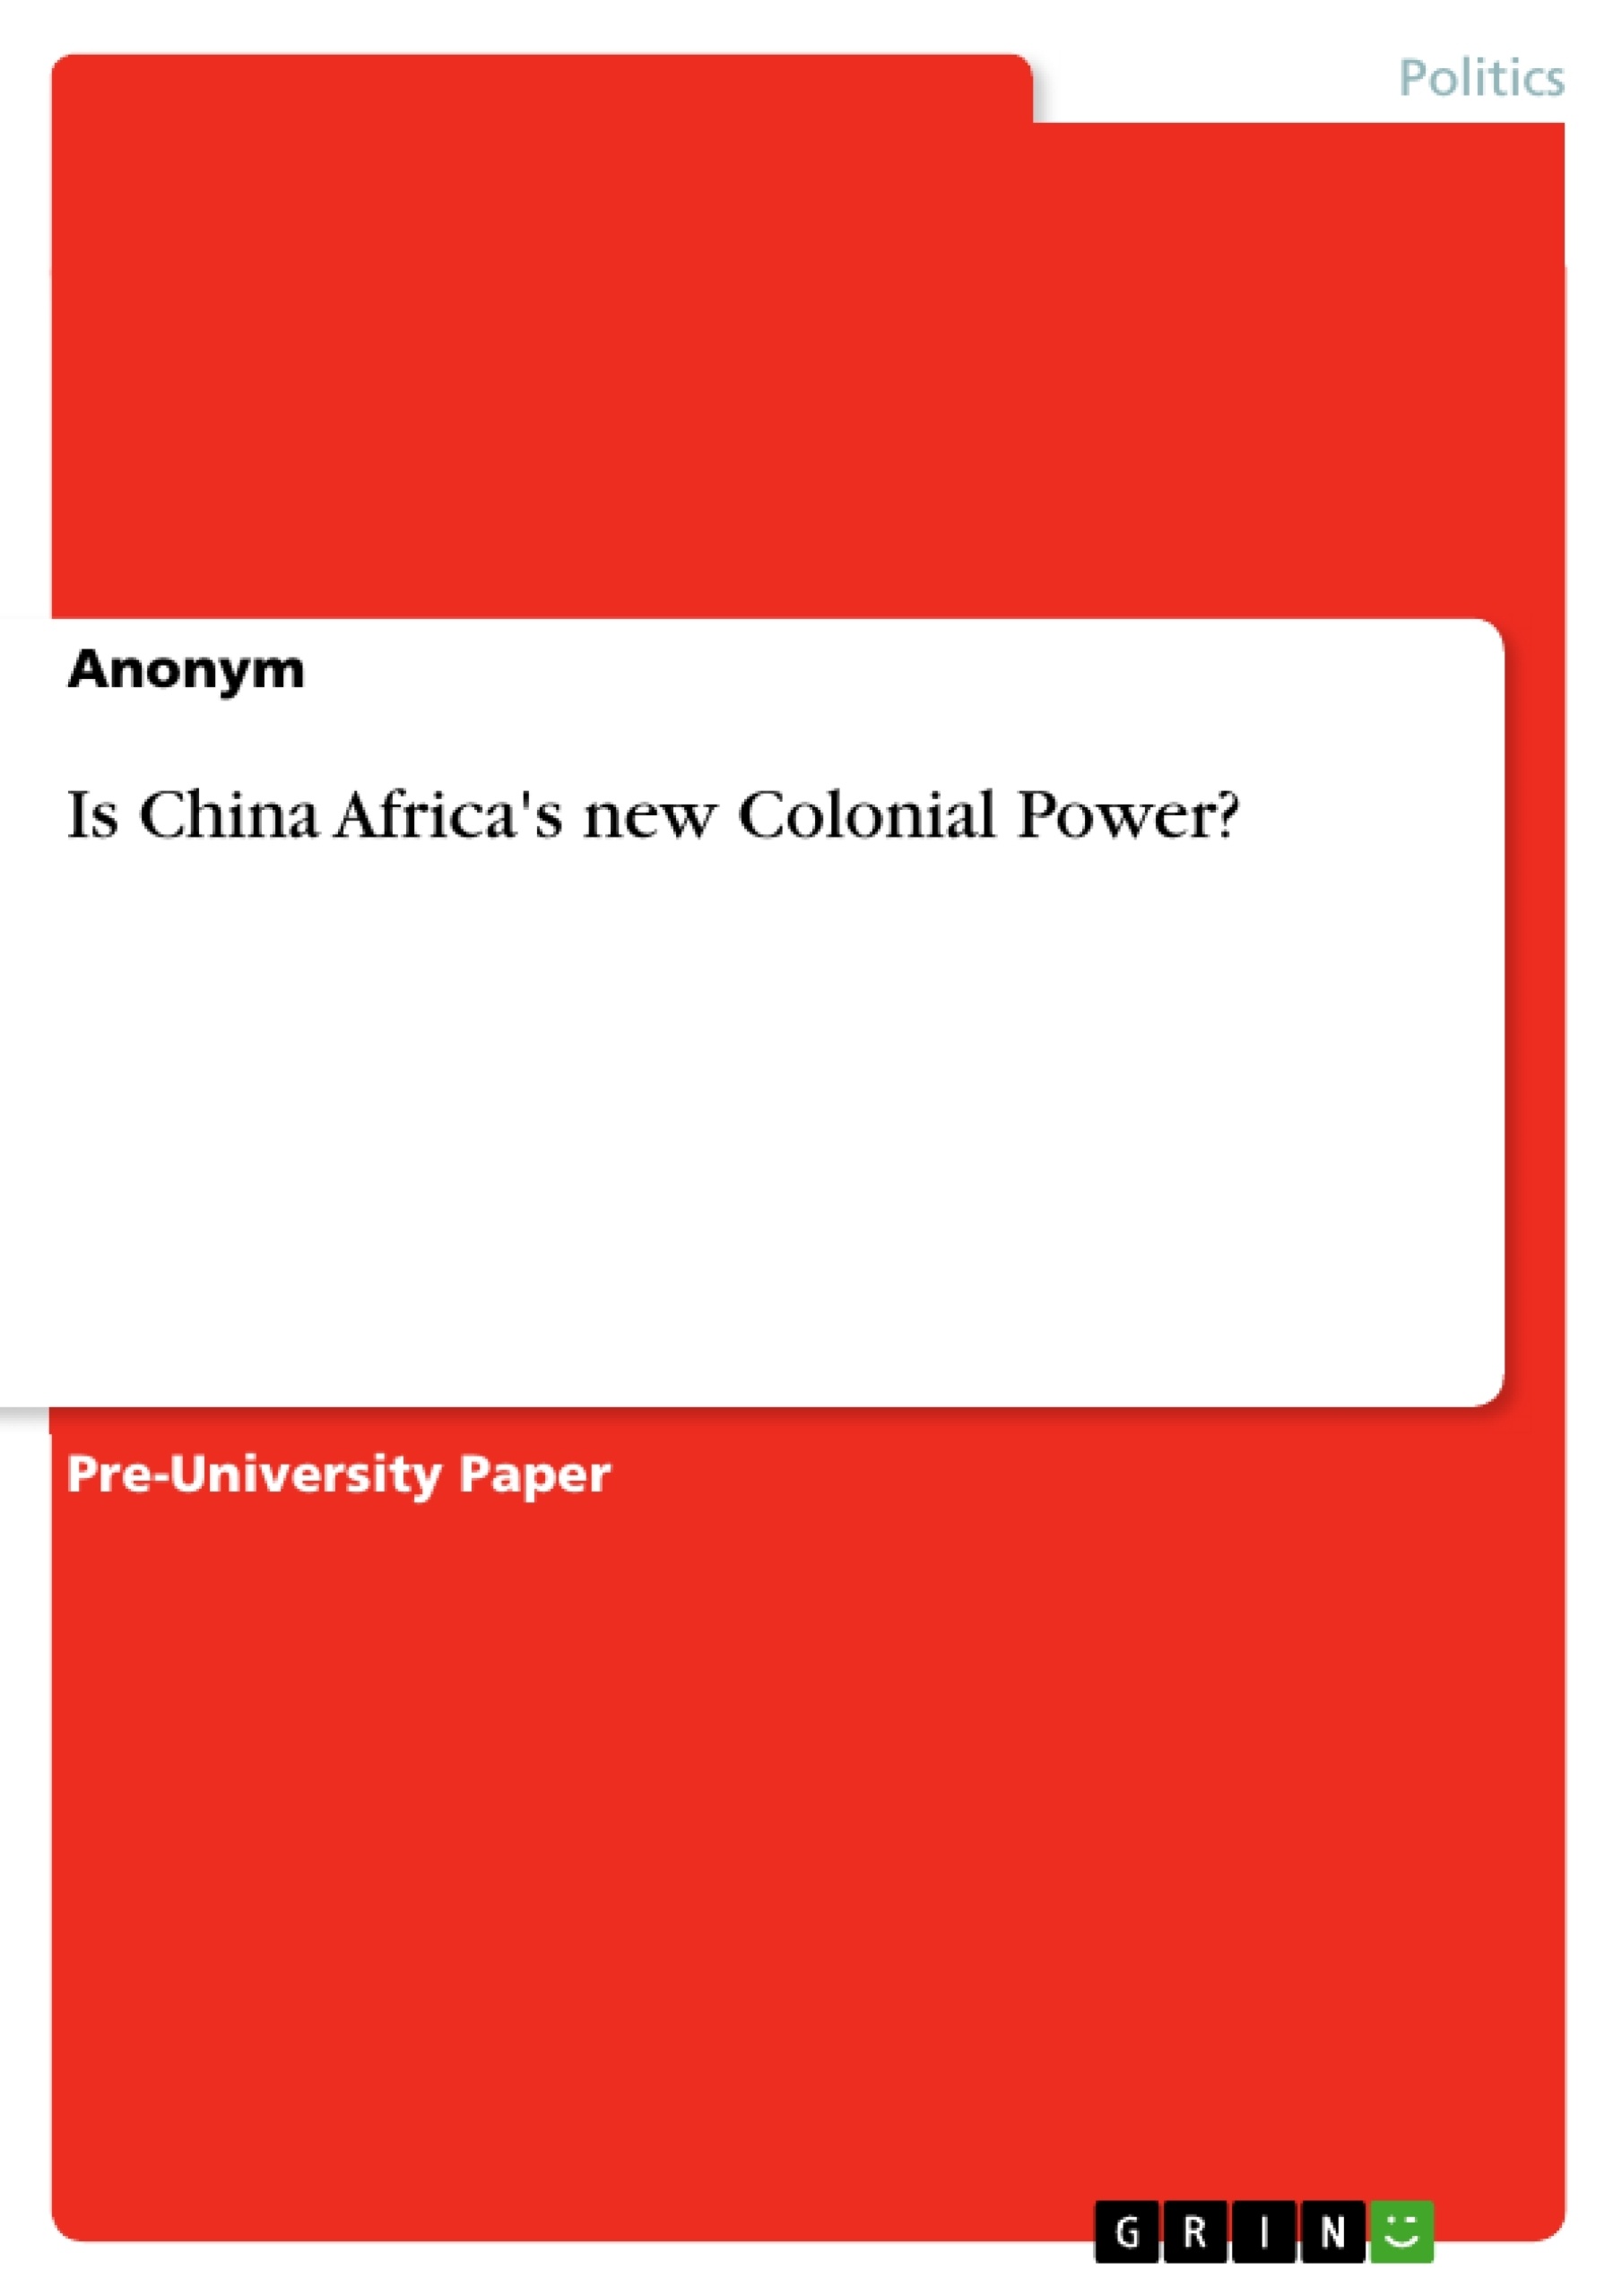 Title: Is China Africa's new Colonial Power?